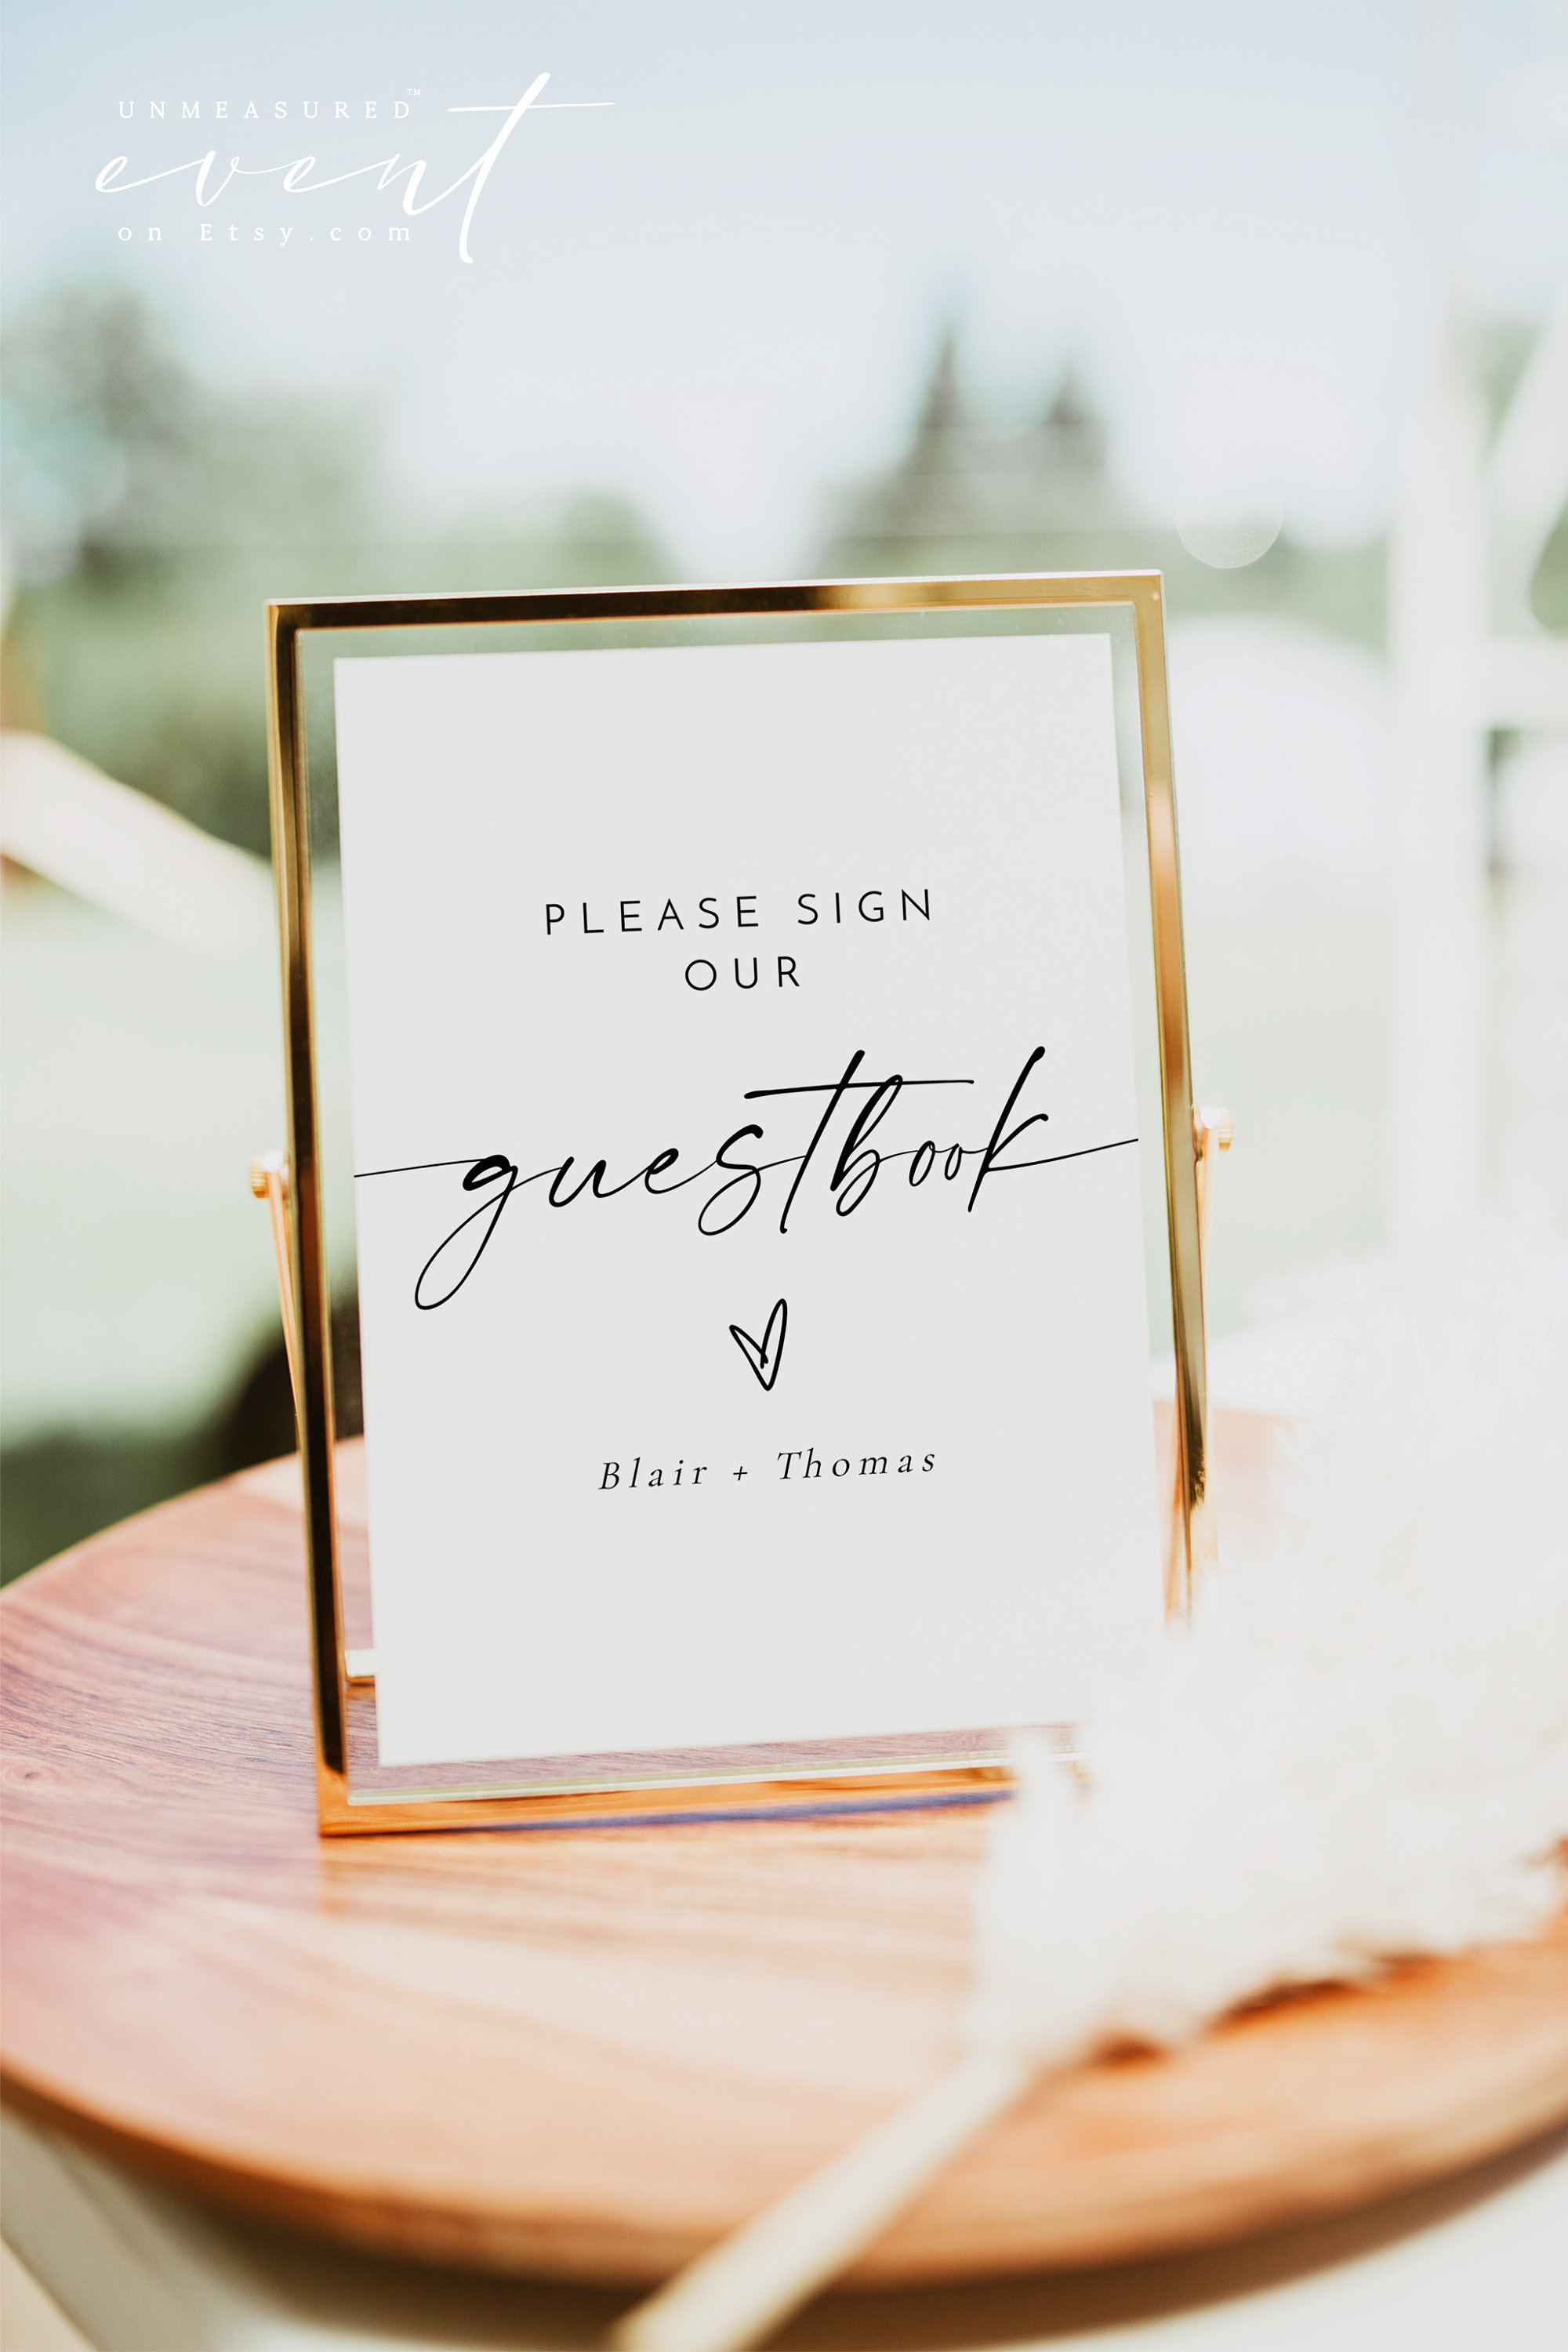 Original Wedding Guest Book with Gold Foil - Gorgeous Weddings Reception Sign in Guestbook 100 Pages for Baby Shower, Events, Wedding, Polaroid